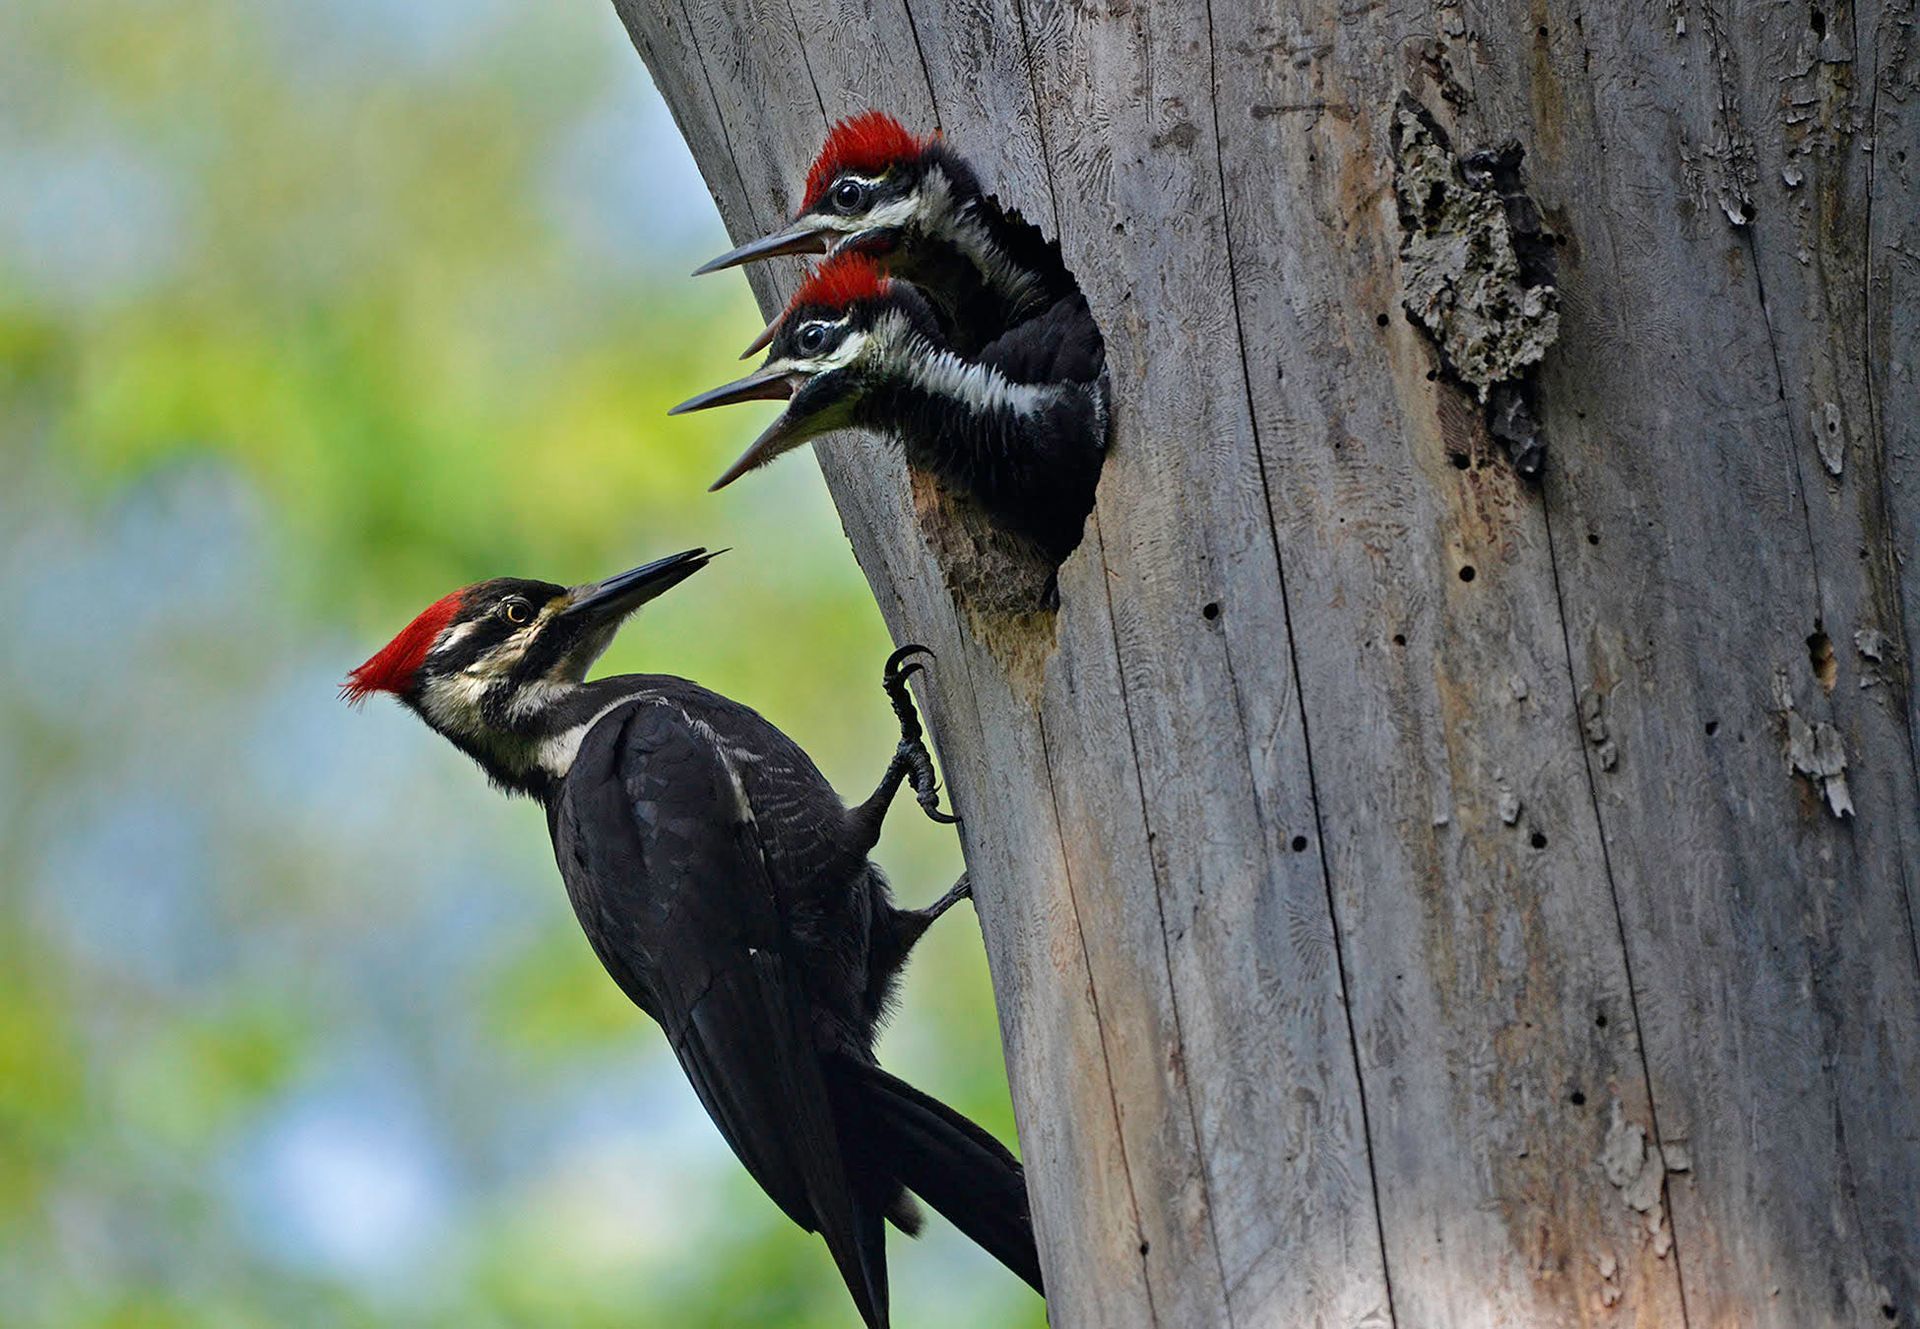 A couple of woodpeckers sitting on a tree trunk